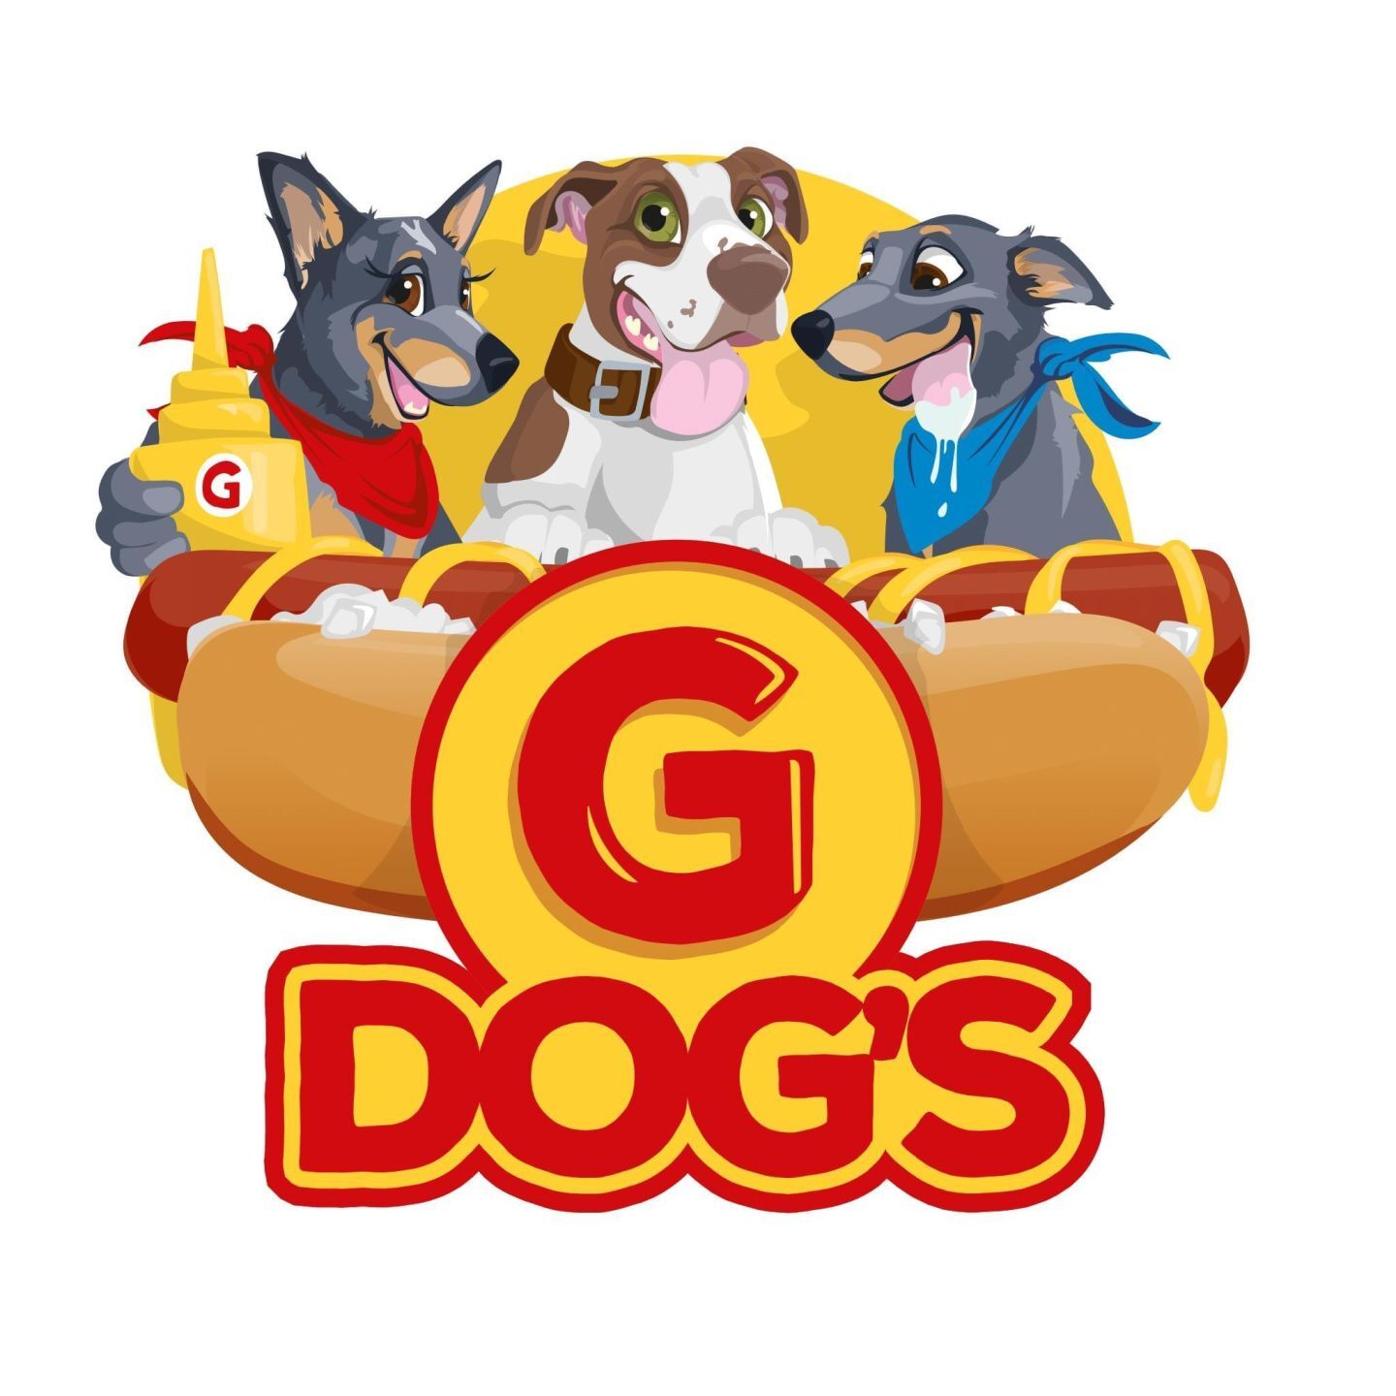 G Dogs' brings hot dog eatery downtown | News 